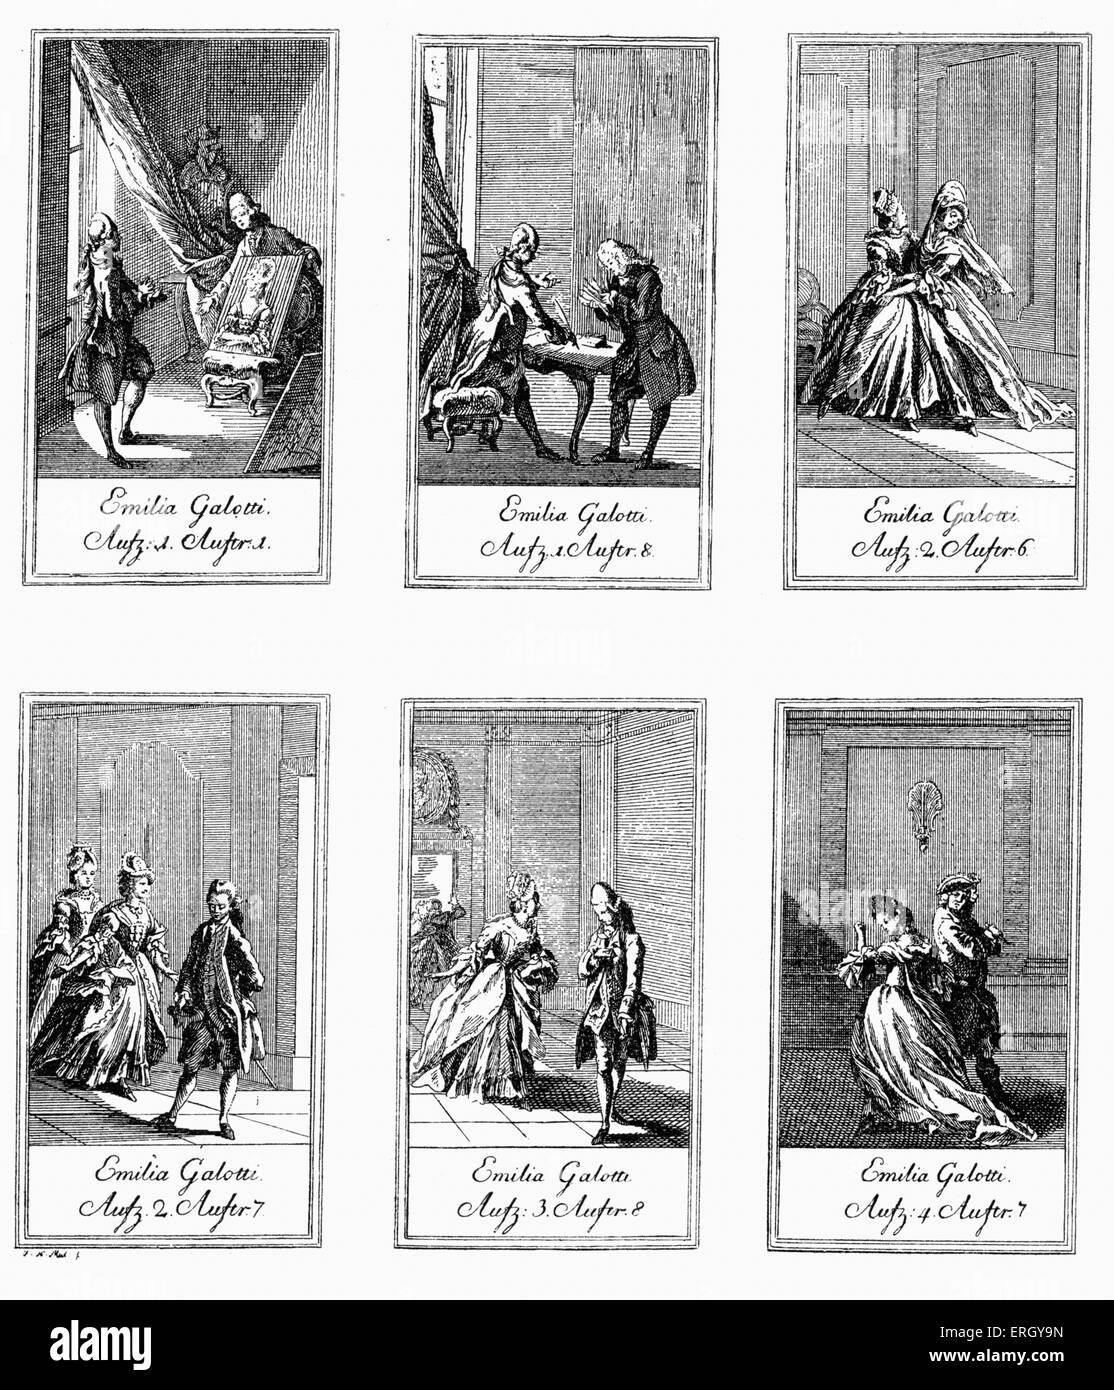 'Emilia Galotti' by Gotthold Ephraim Lessing,  engravings of scenes from the play  by Johann Heinrich Meil. JHM, German Stock Photo